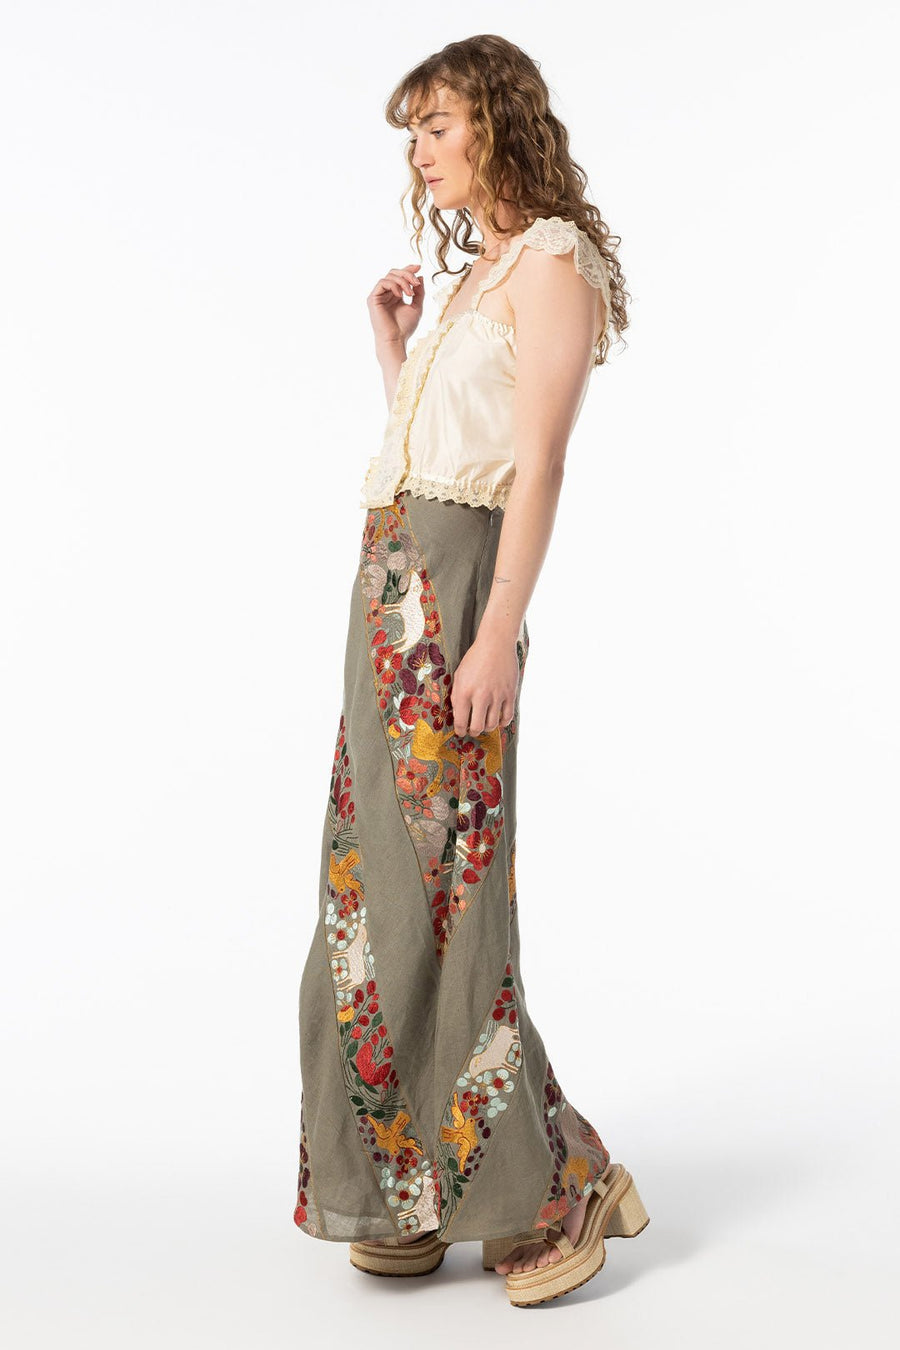 UXMAL EMBROIDERED MAXI SKIRT, ARMY - Burning Torch Online Boutique